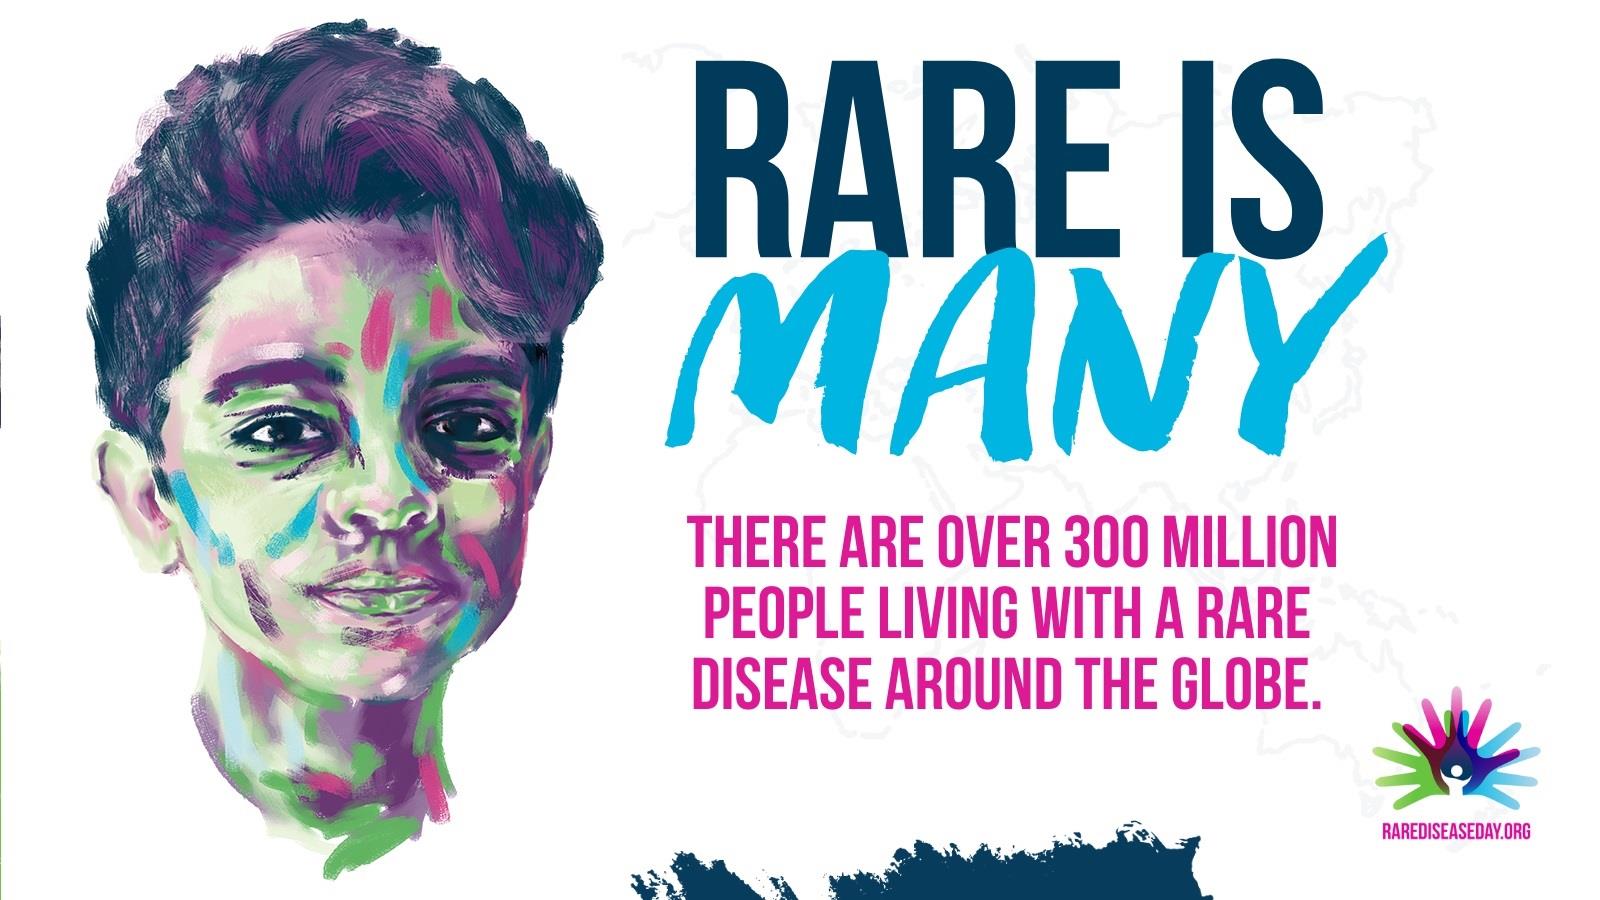 Boy's face with Rare Disease Day logo and key fact